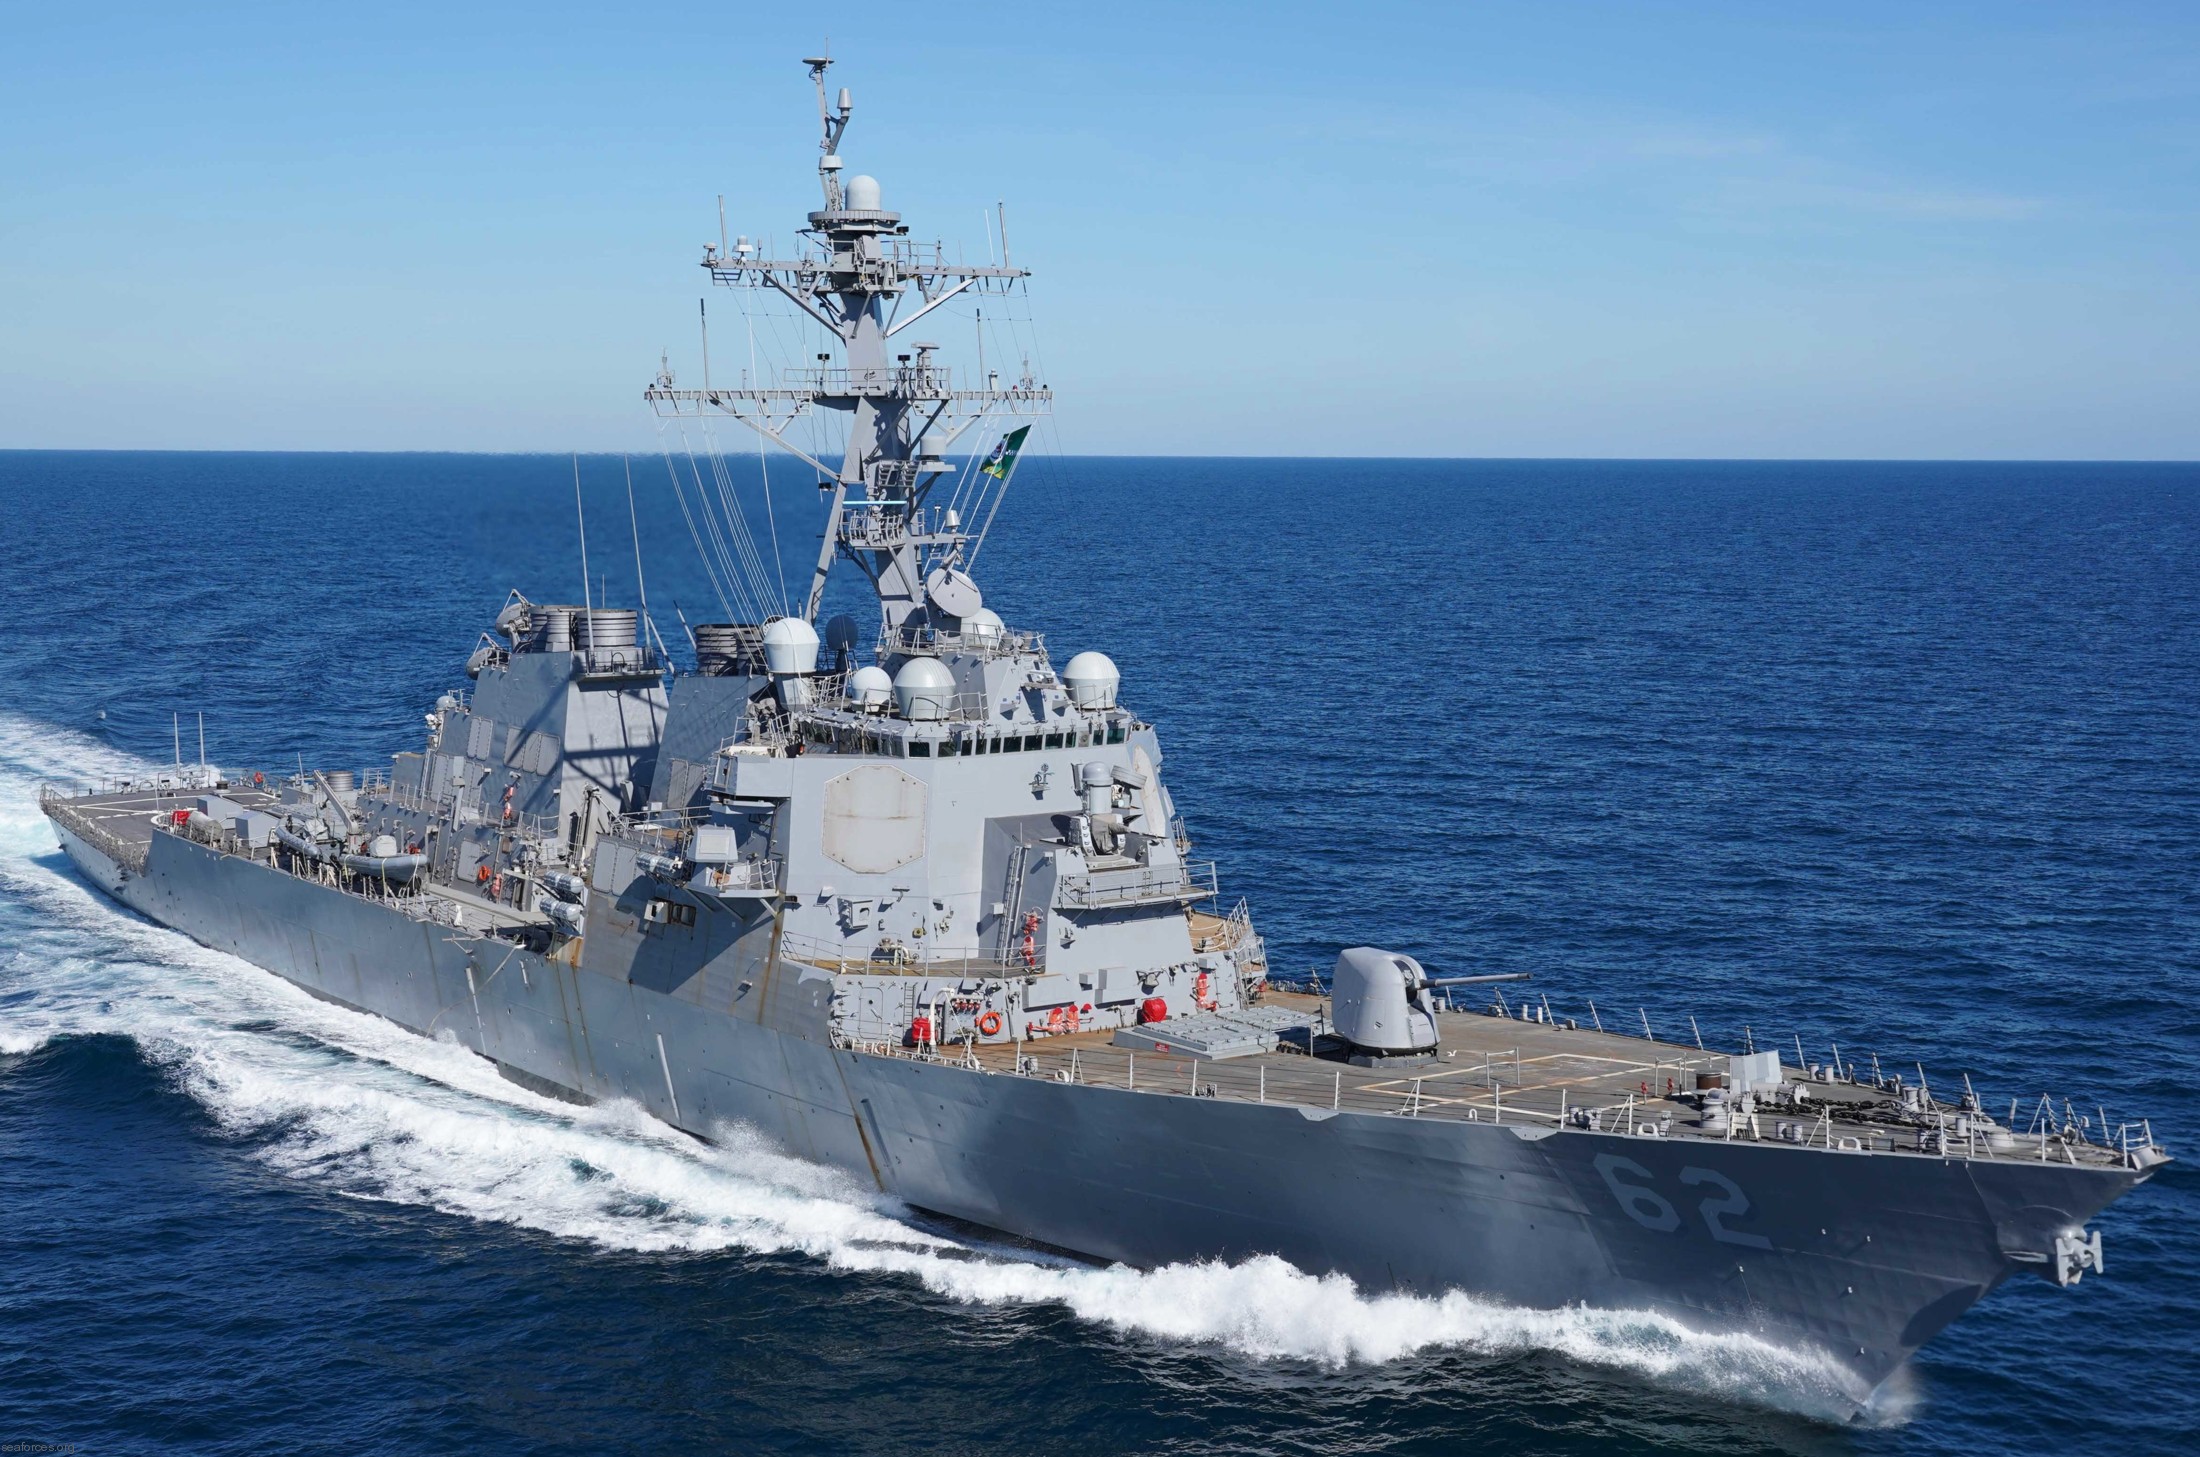 ddg-62 uss fitzgerald guided missile destroyer arleigh burke class navy trials gulf of mexico 2020 153